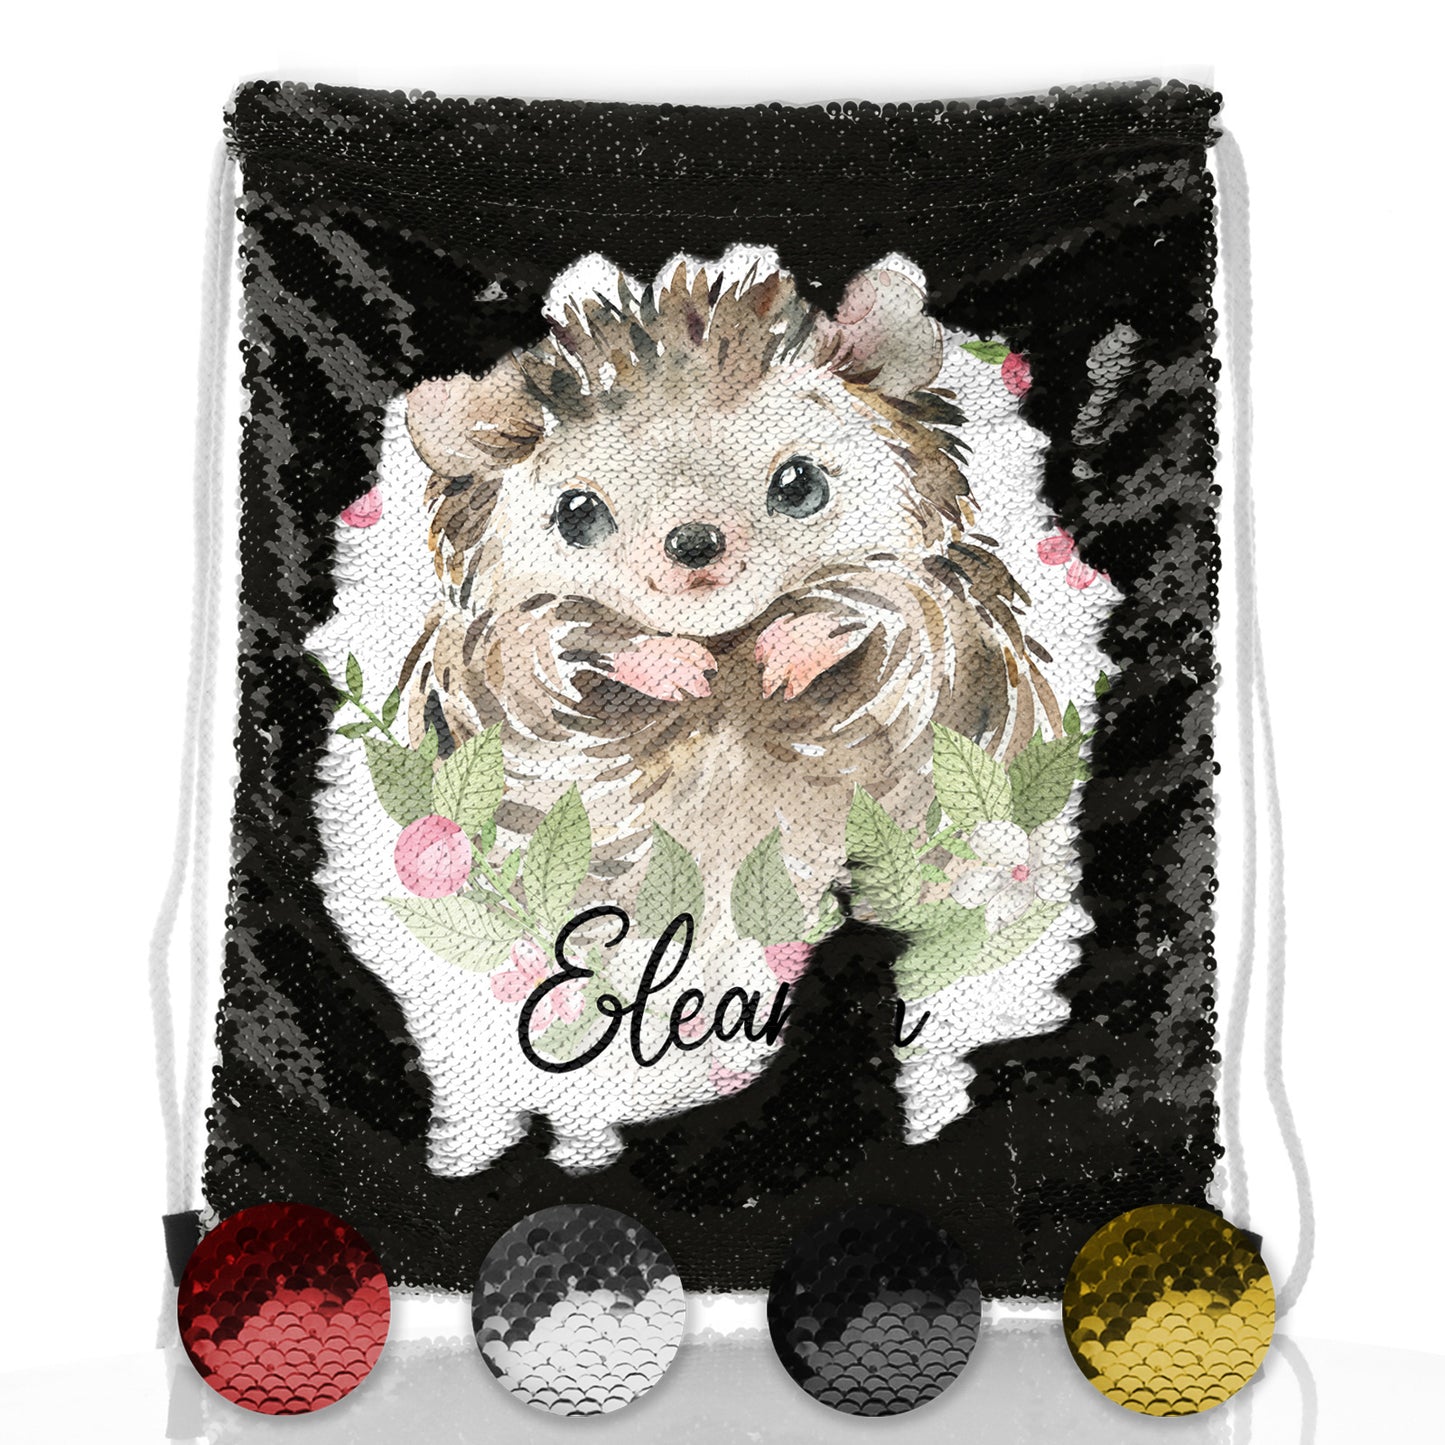 Personalised Sequin Drawstring Backpack with Hedgehog Pink Flowers and Cute Text